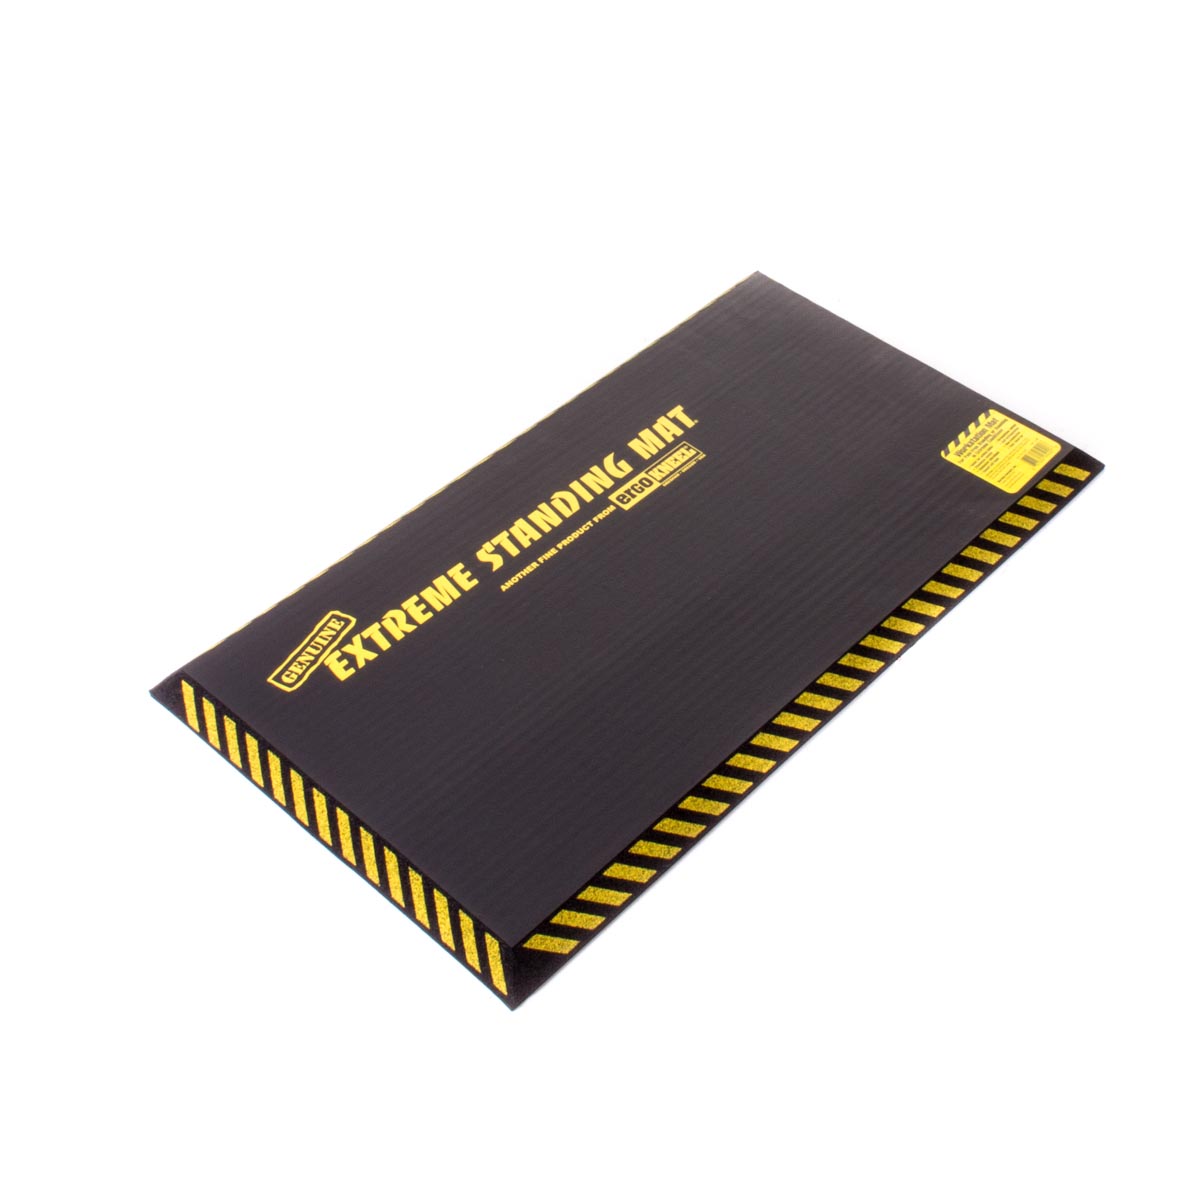 Working Concepts EXTREME Standing Mat 16 x 28 x 1